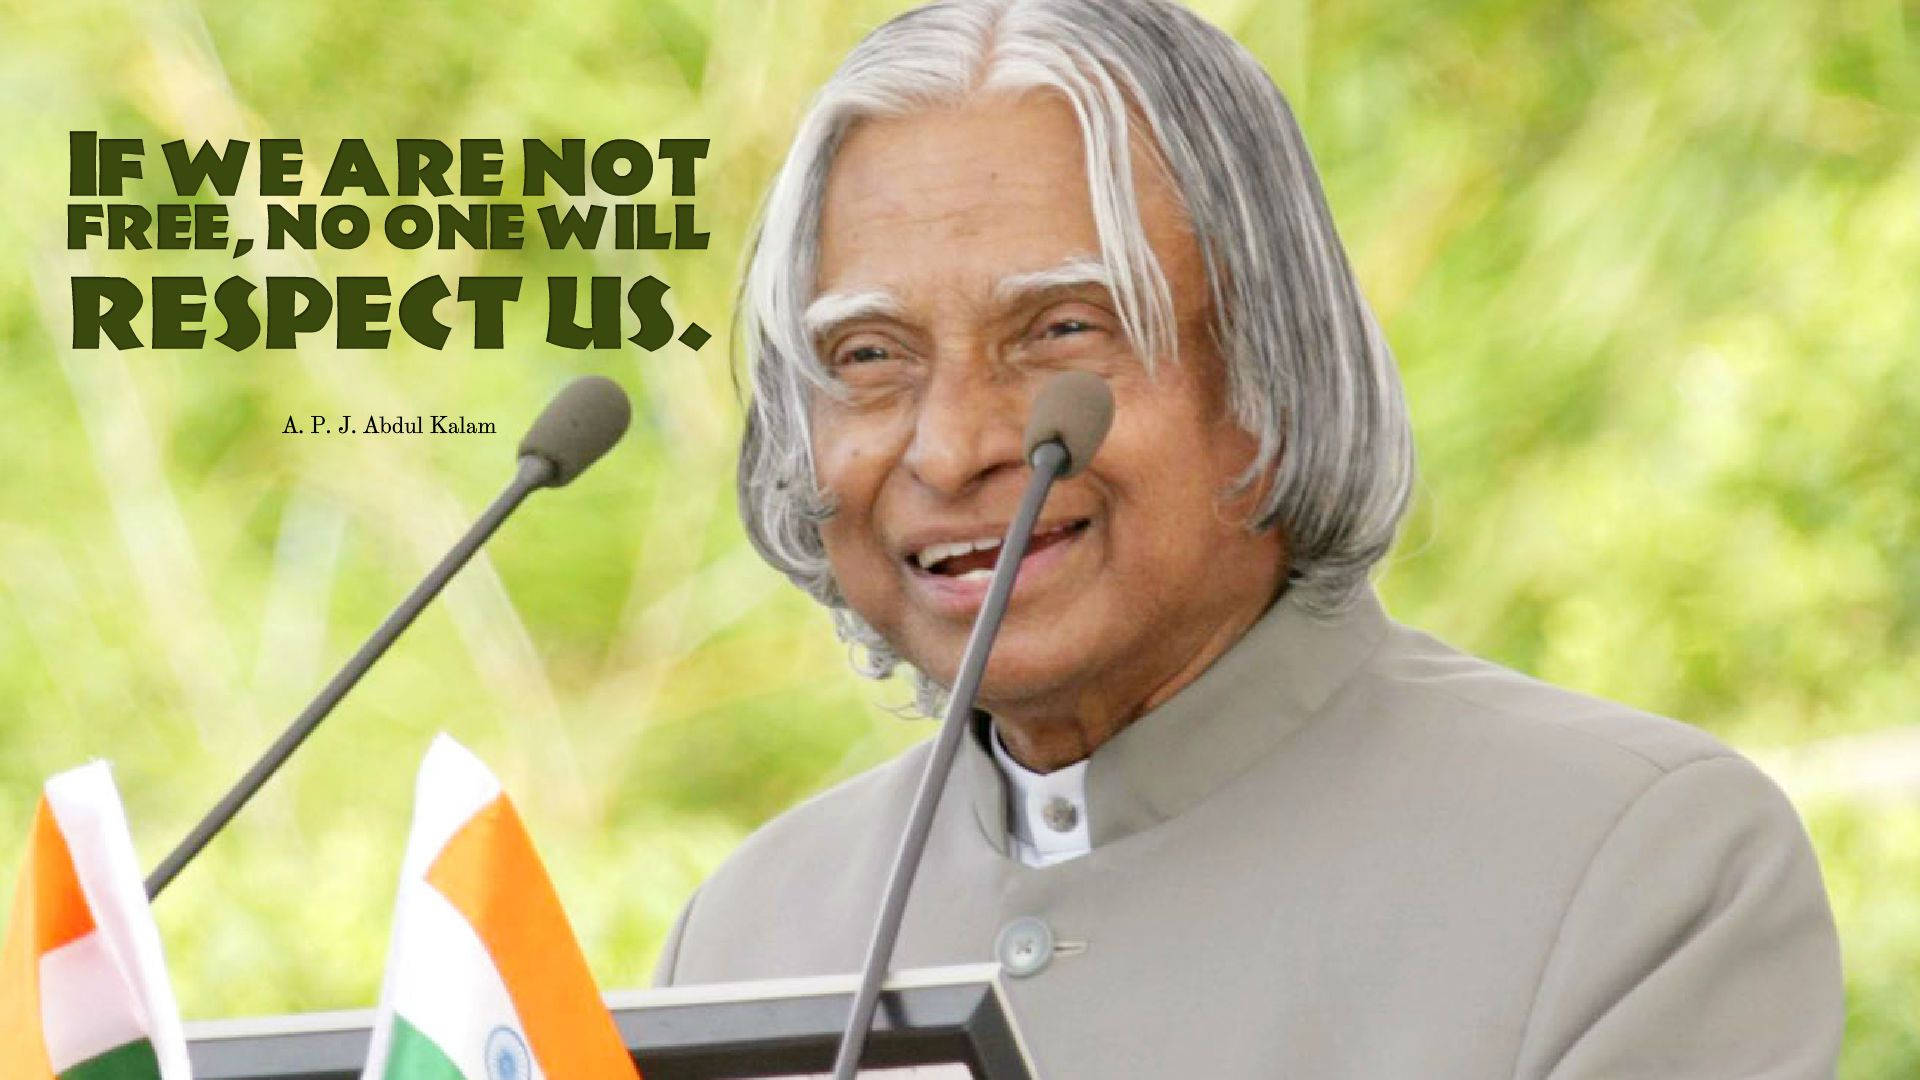 Abdul Kalam Hd Freedom And Respect Quote Background